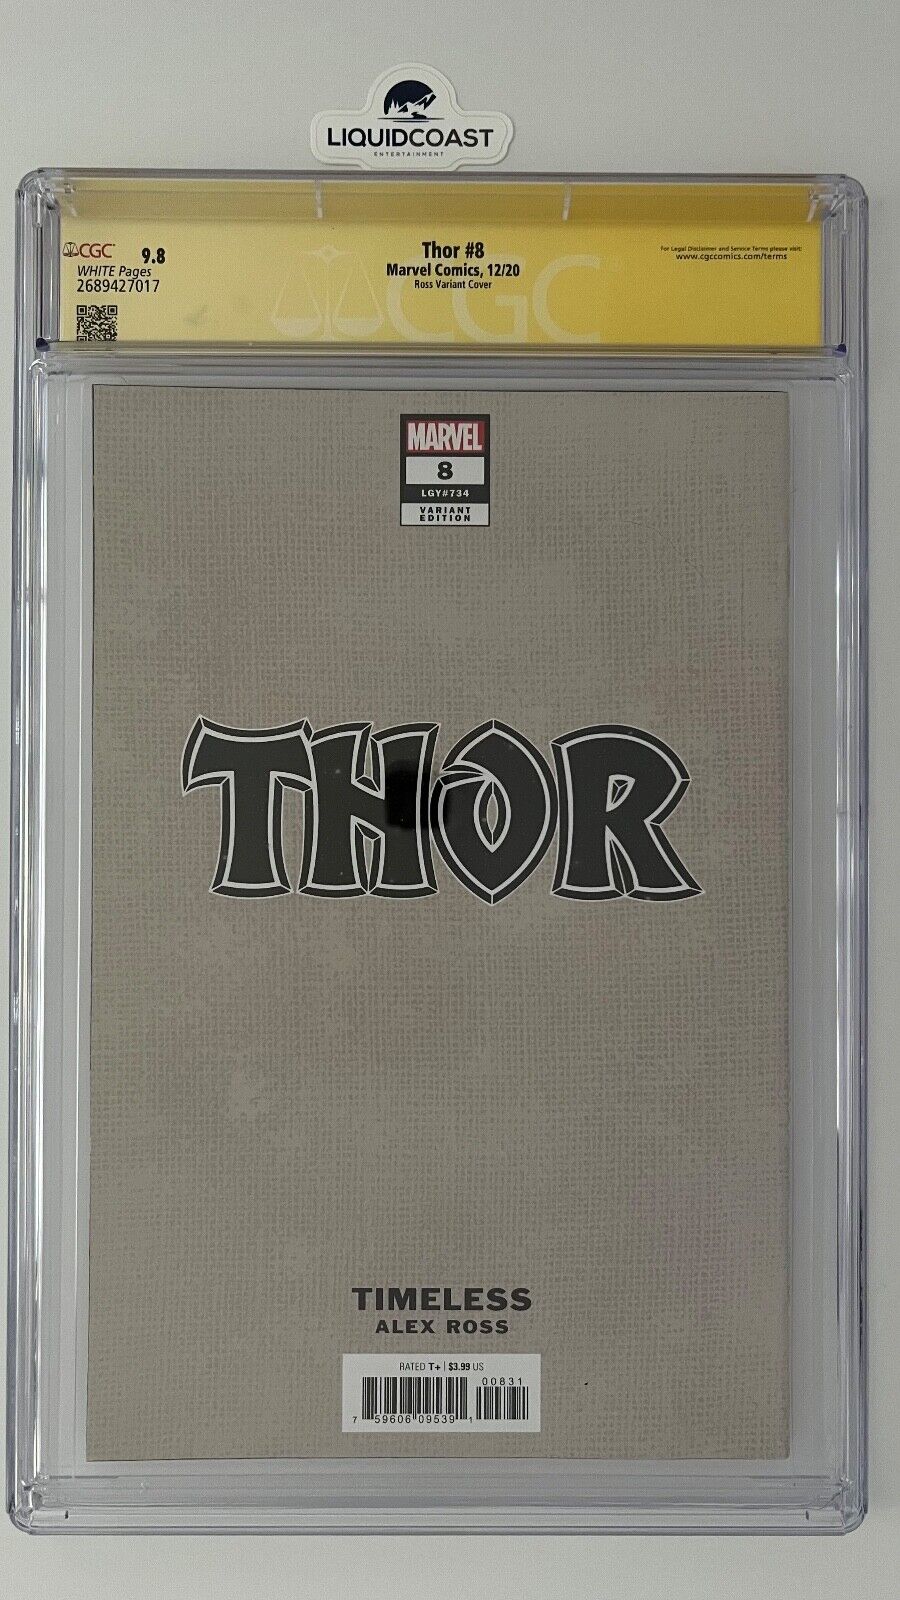 Thor #8 SS CGC 9.8 signed by DONNY CATES Ross Variant Cover